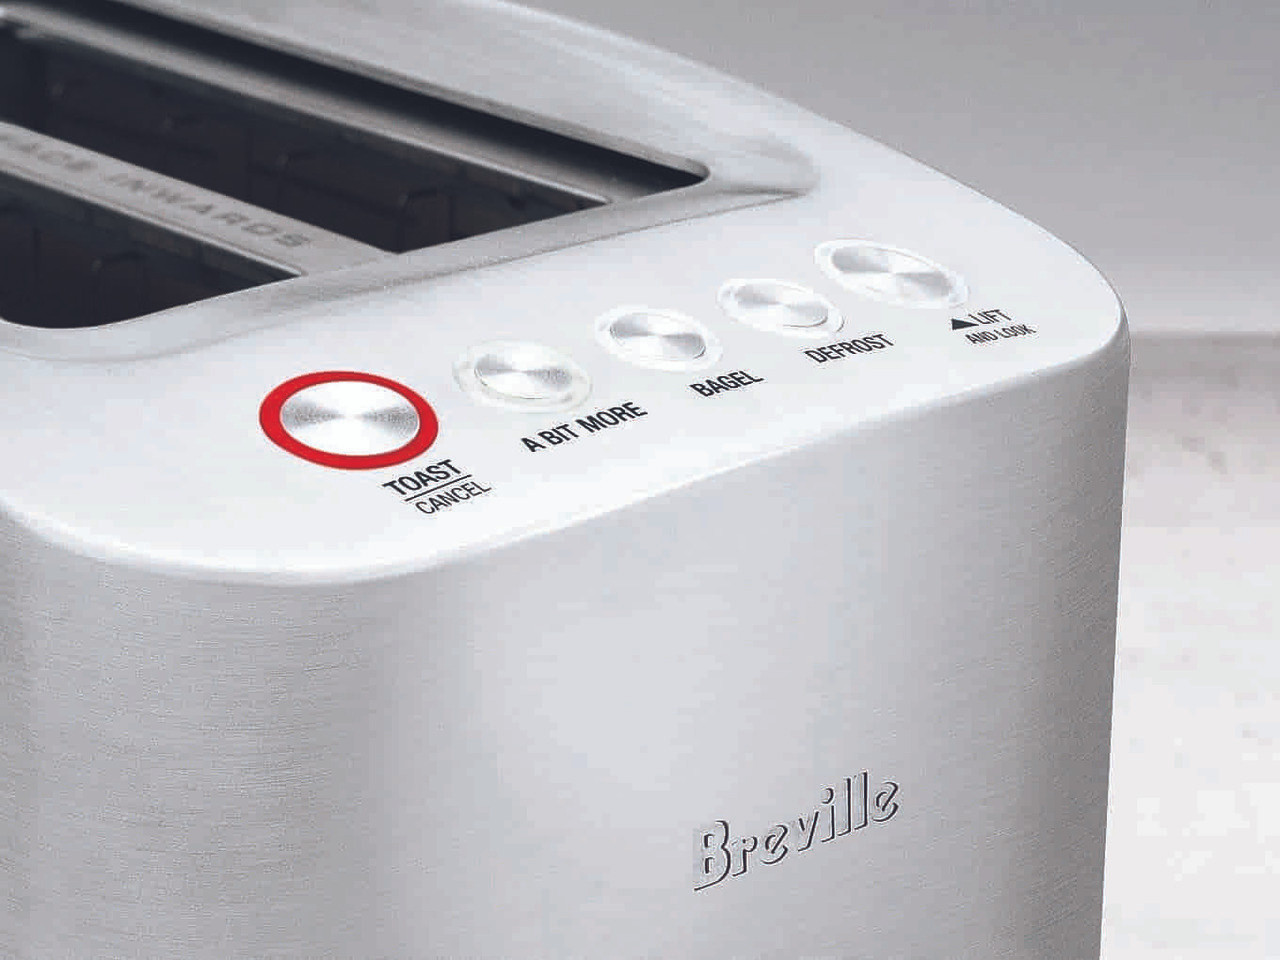 Breville Ikon Lift and Look Toaster - 4 Slice